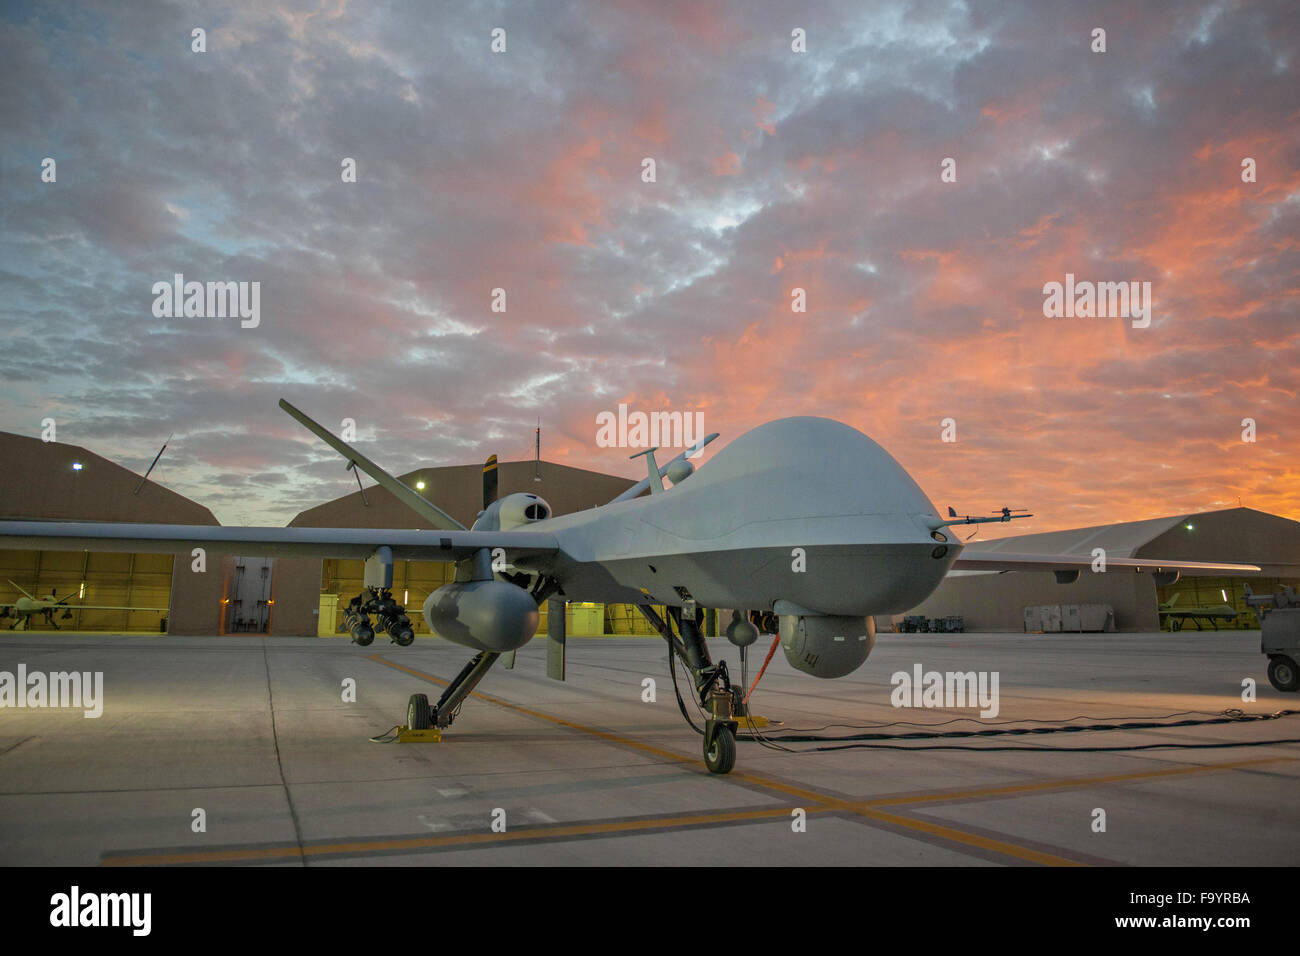 A U.S. Air Force extended range MQ-9 Reaper drone with the 62nd Expeditionary Reconnaissance Squadron on the ramp at Kandahar Airfield December 6, 2015 in Kandahar, Afghanistan. The modification allows for up to 20 to 40 percent additional flight time. Stock Photo